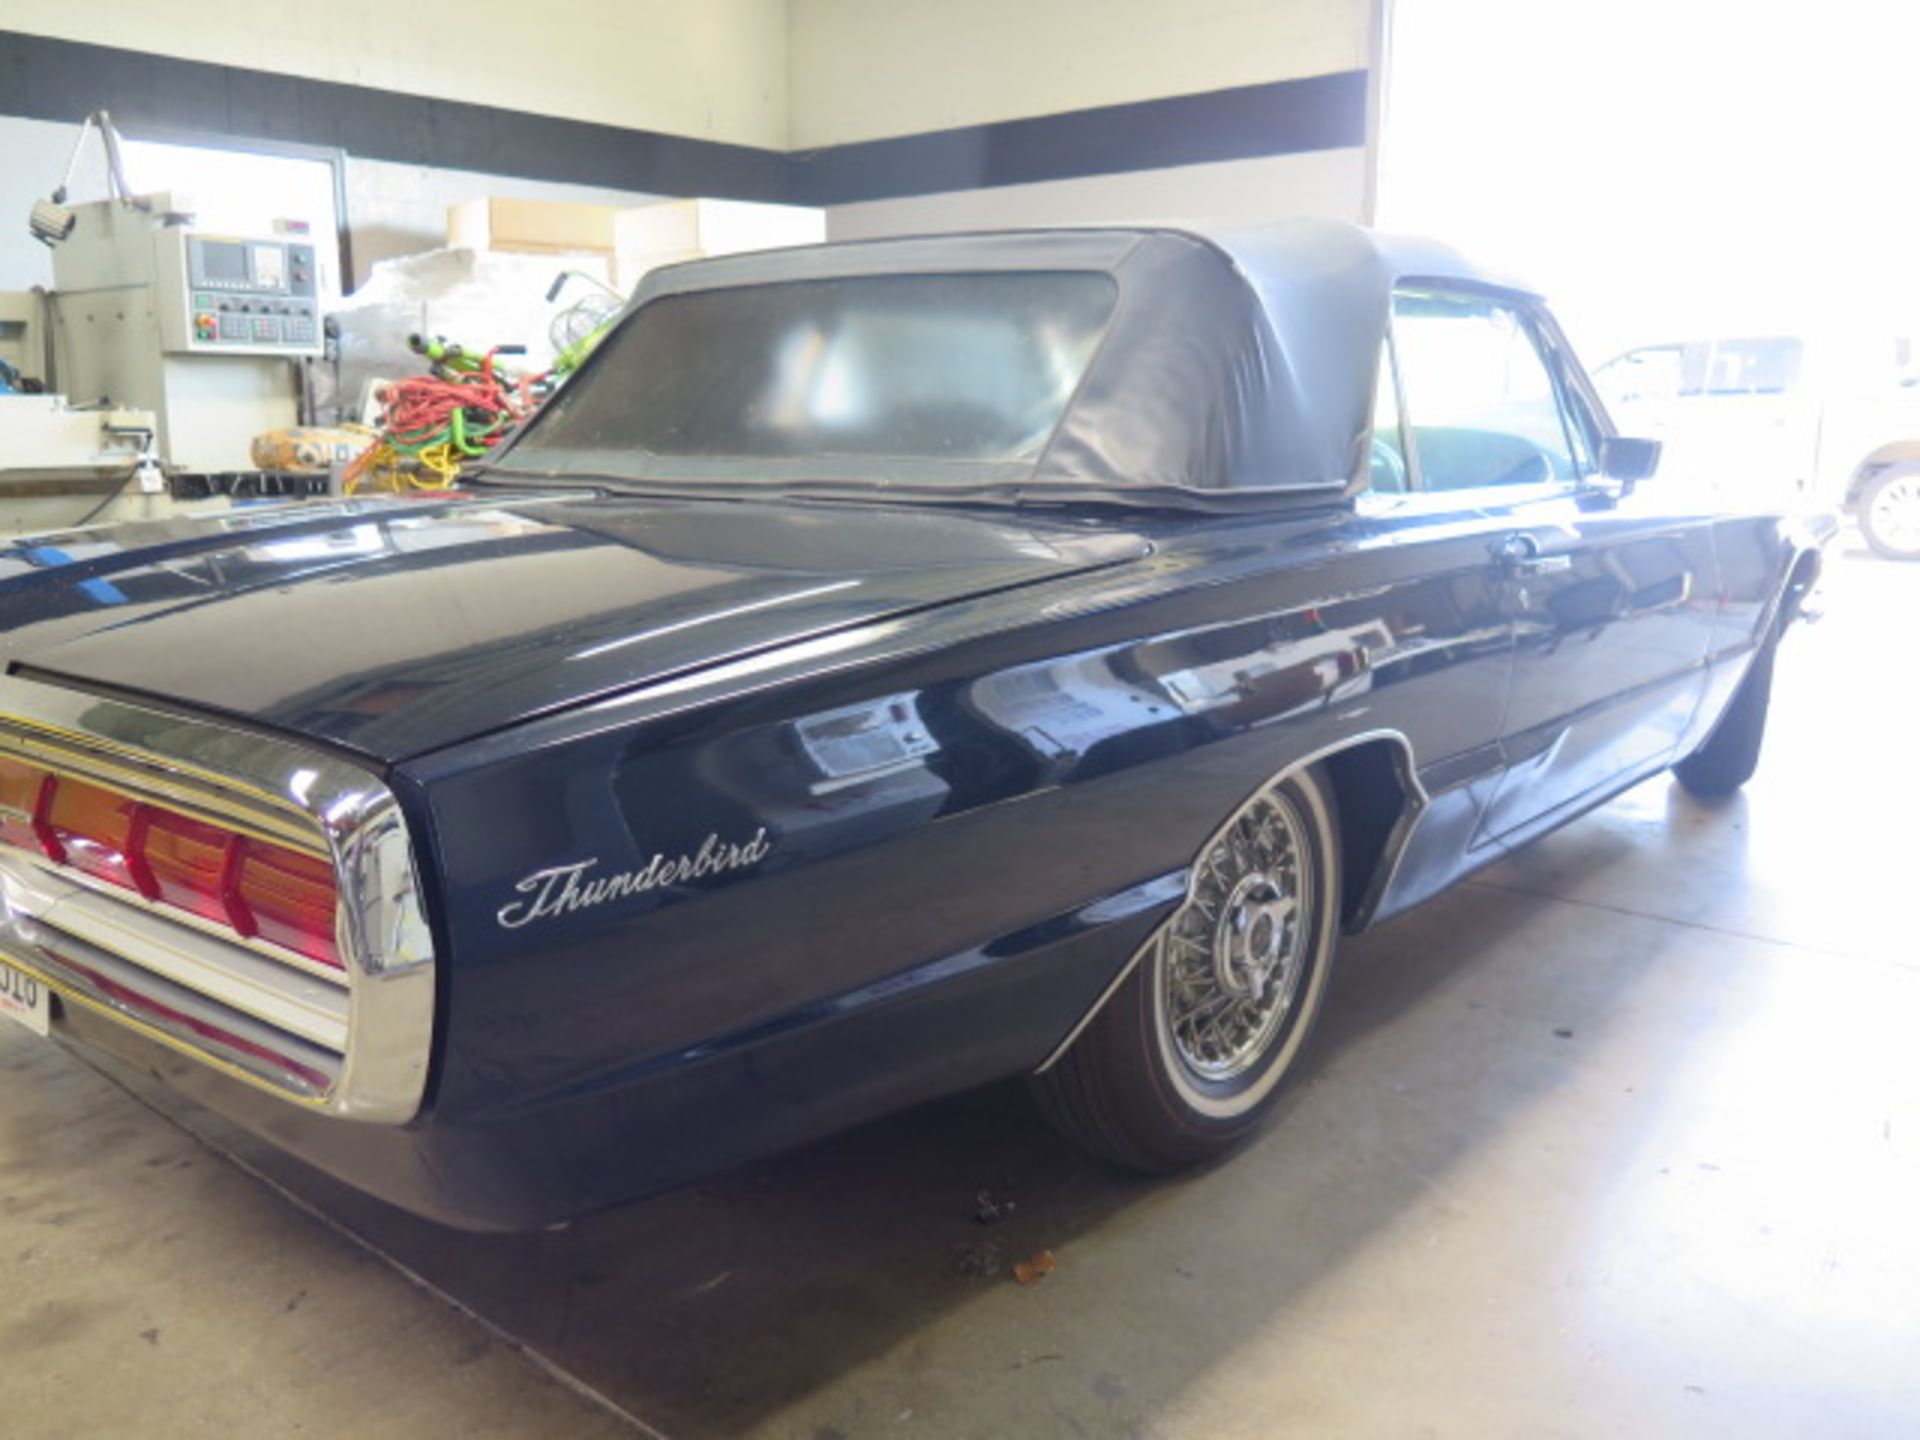 1966 Ford Thunderbird Convertible, Rare Q Code 428 w/ 3x2 Carburetors. (SOLD AS-IS - NO WARRANTY) - Image 4 of 45